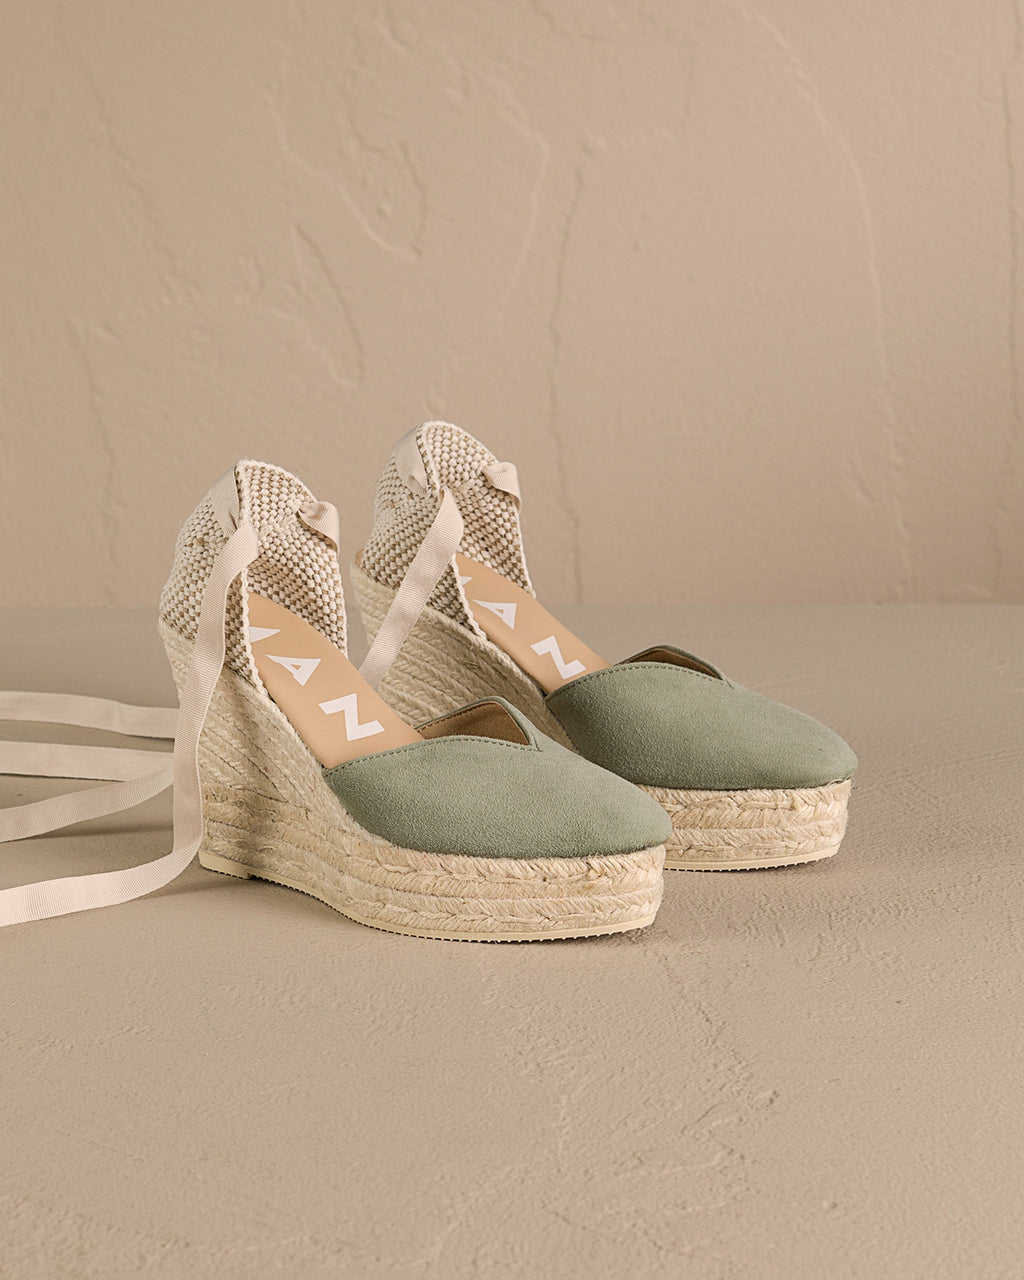 Soft Suede Heart-Shaped|Wedge Espadrilles - Soft Suede Heart-Shaped Wedge Espadrilles Sage